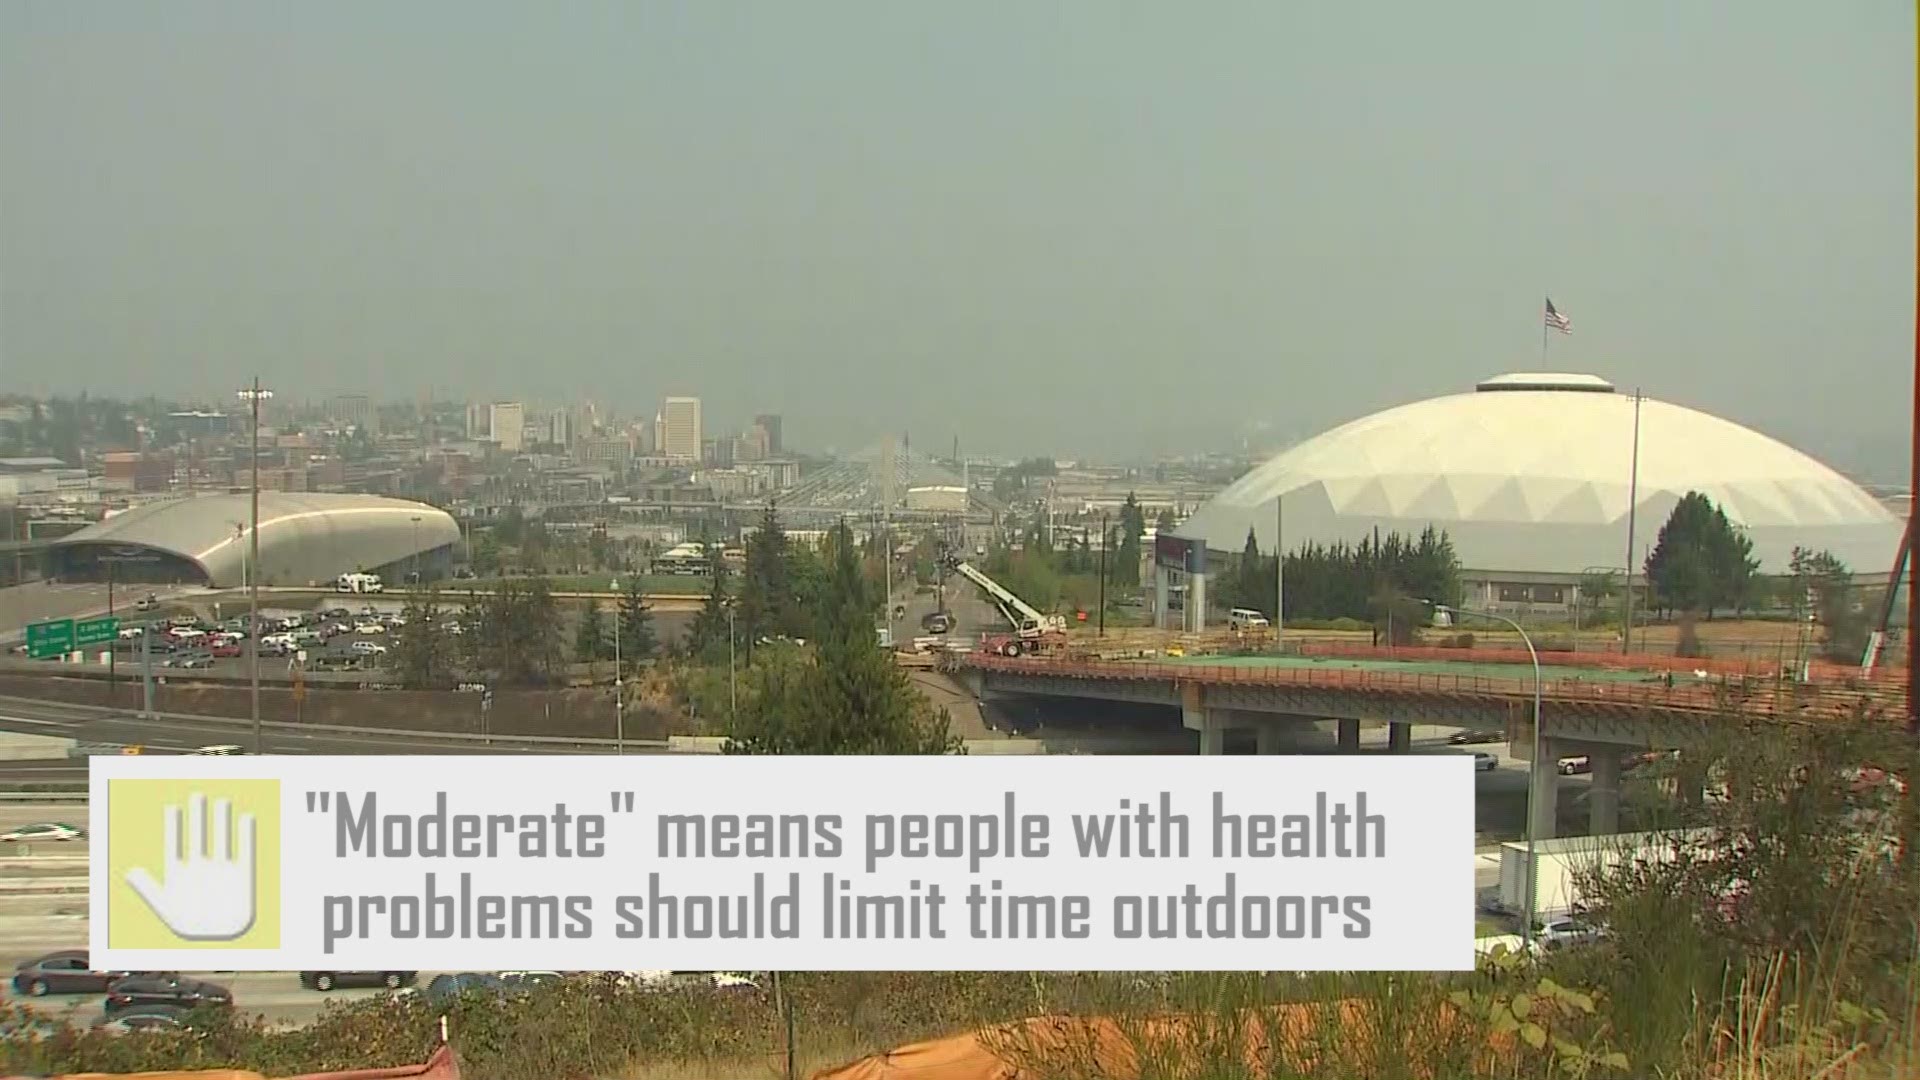 The Washington State Department of Health has a system to determine if air quality poses a health risk. Here's a breakdown of what each of those levels means.